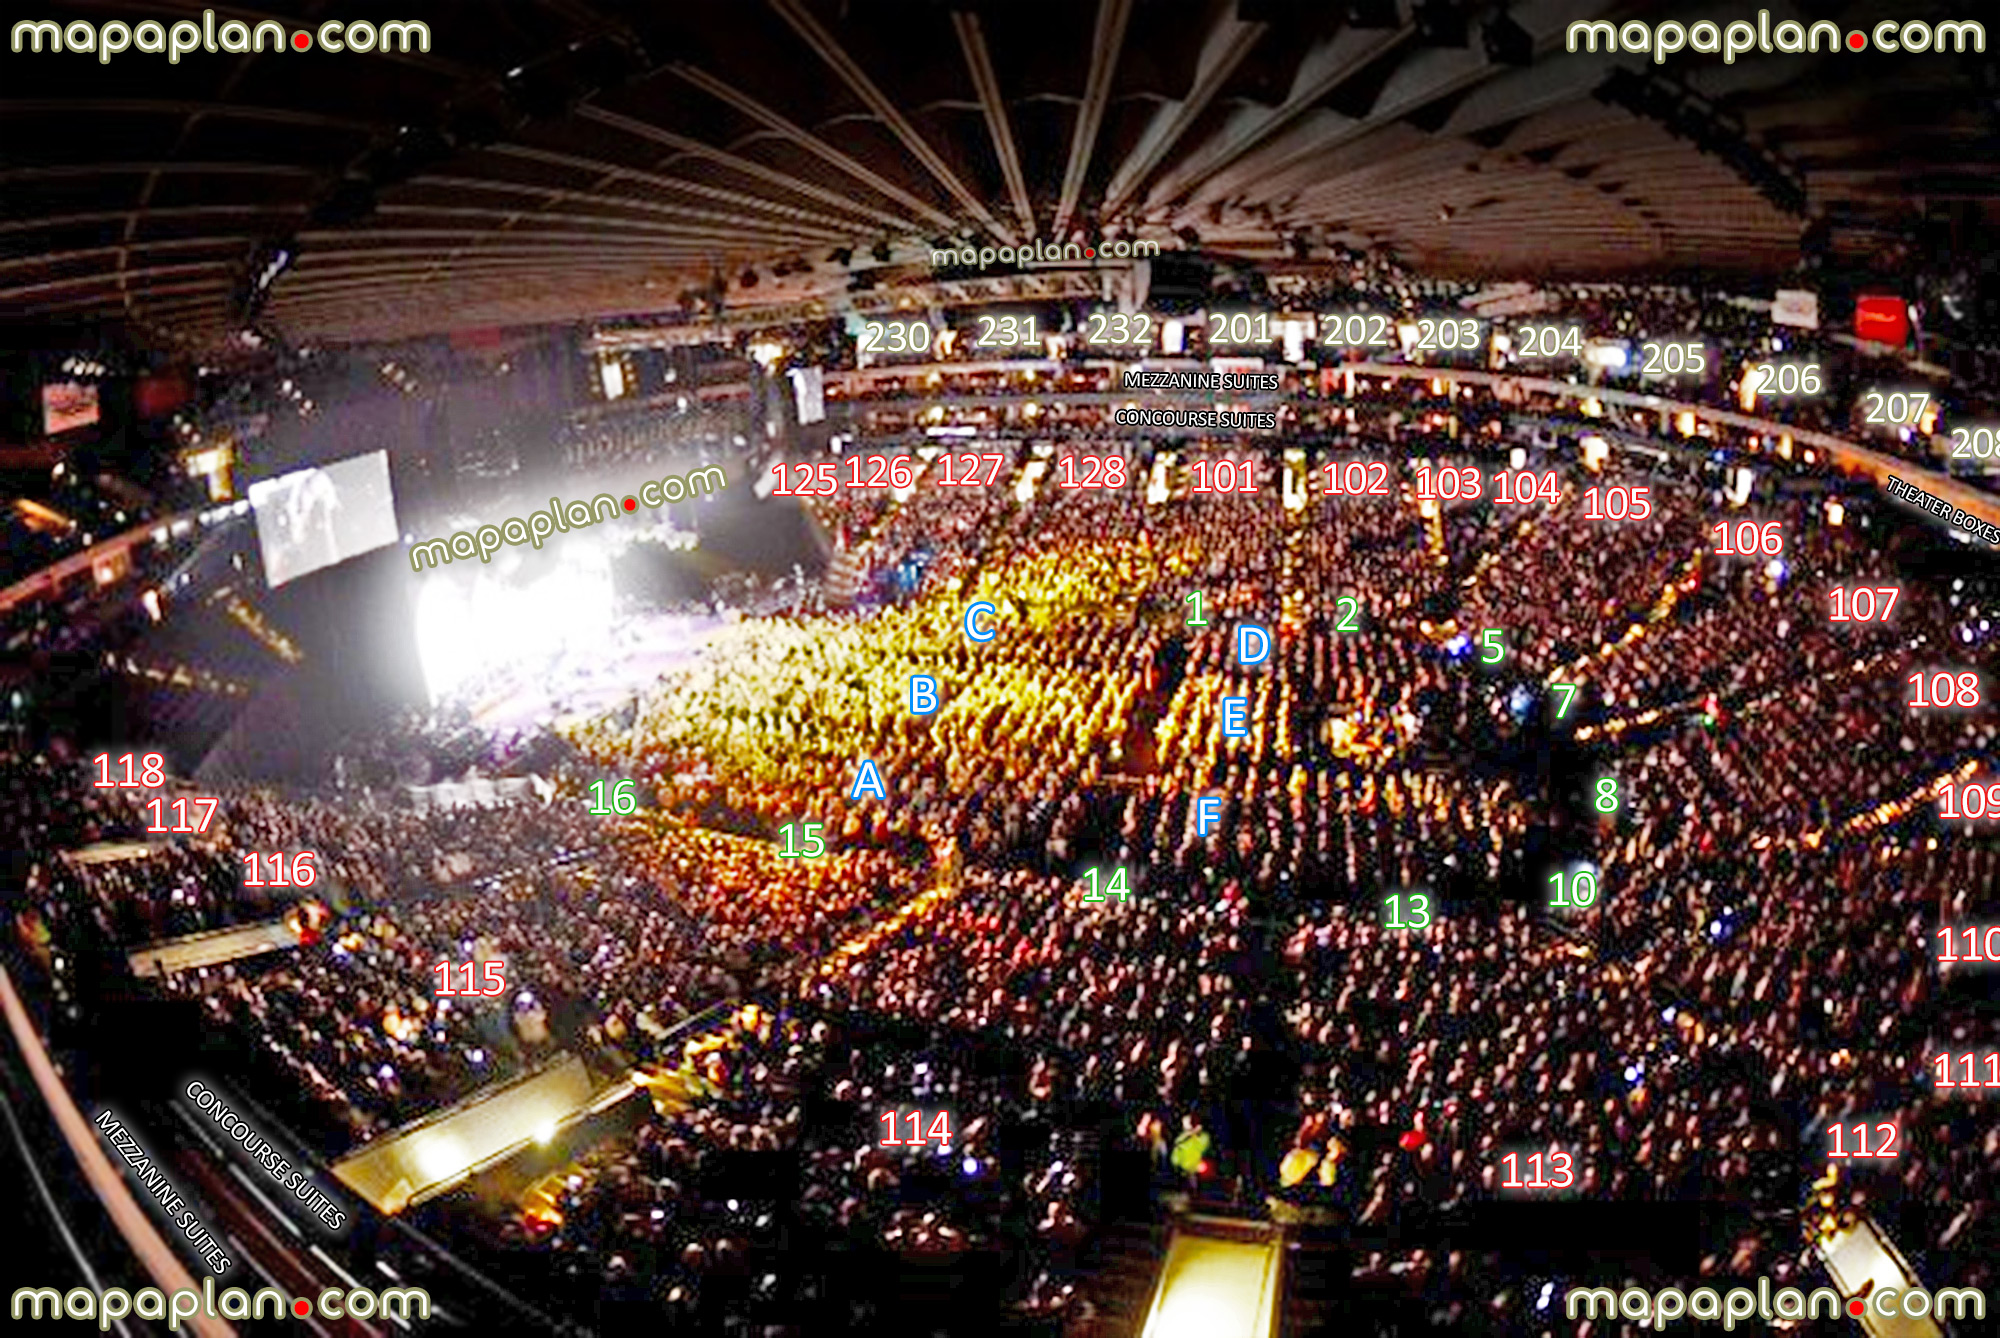 view section 215 row 1 seat 10 virtual review concert stage photo guide sections 101 102 103 104 105 106 107 108 109 110 111 112 113 114 115 116 117 118 119 120 121 122 123 124 125 126 127 128 Oakland Oracle Arena seating chart